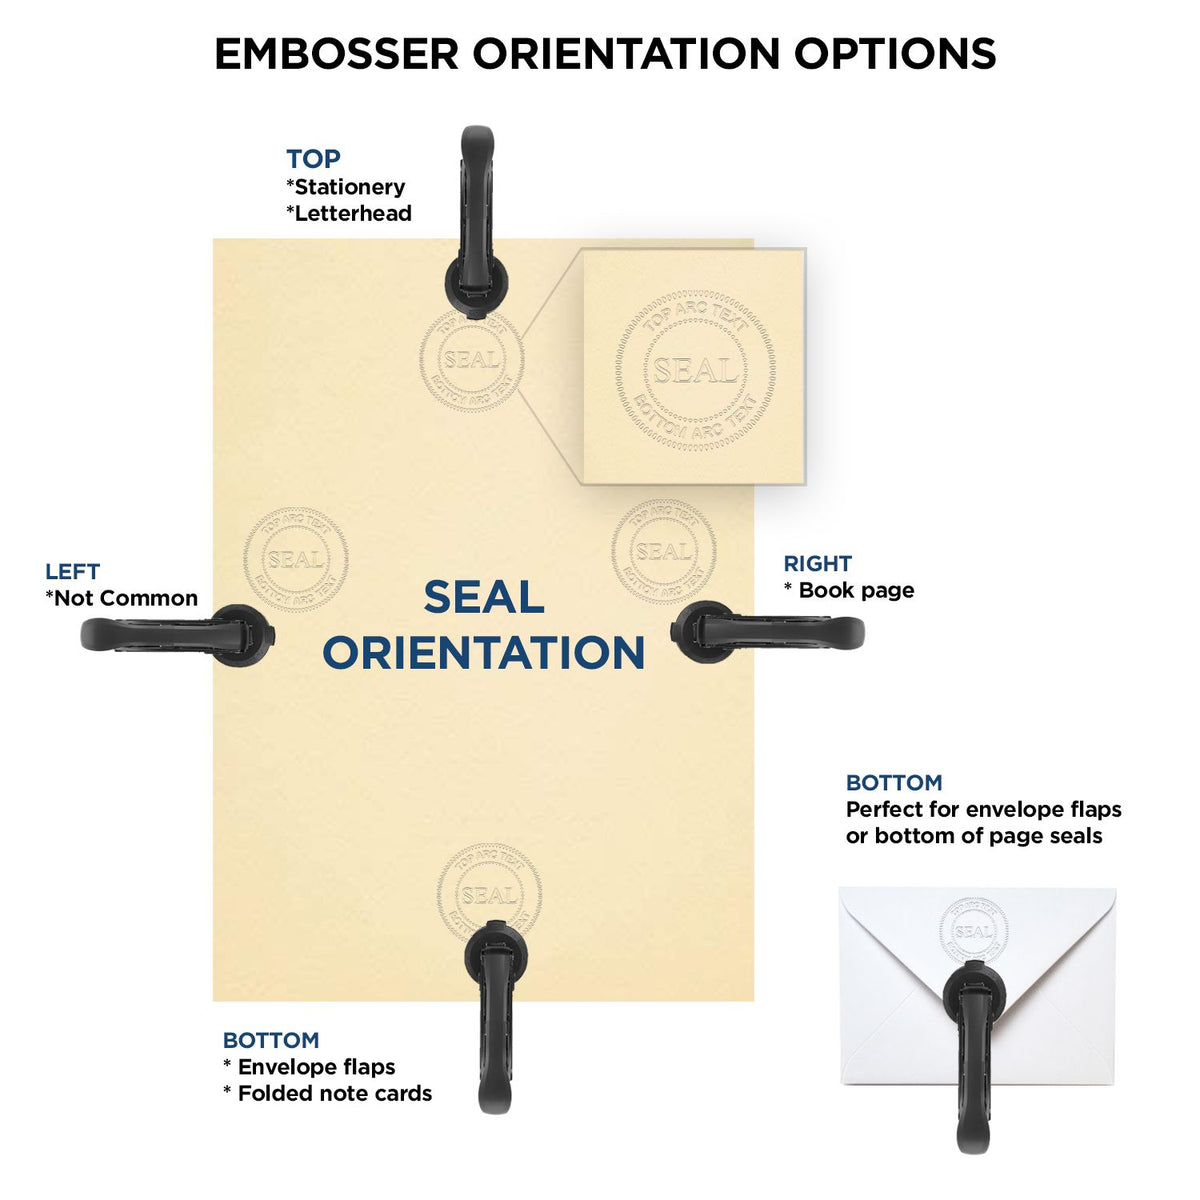 An infographic for the Gift Colorado Land Surveyor Seal showing embosser orientation, this is showing examples of a top, bottom, right and left insert.